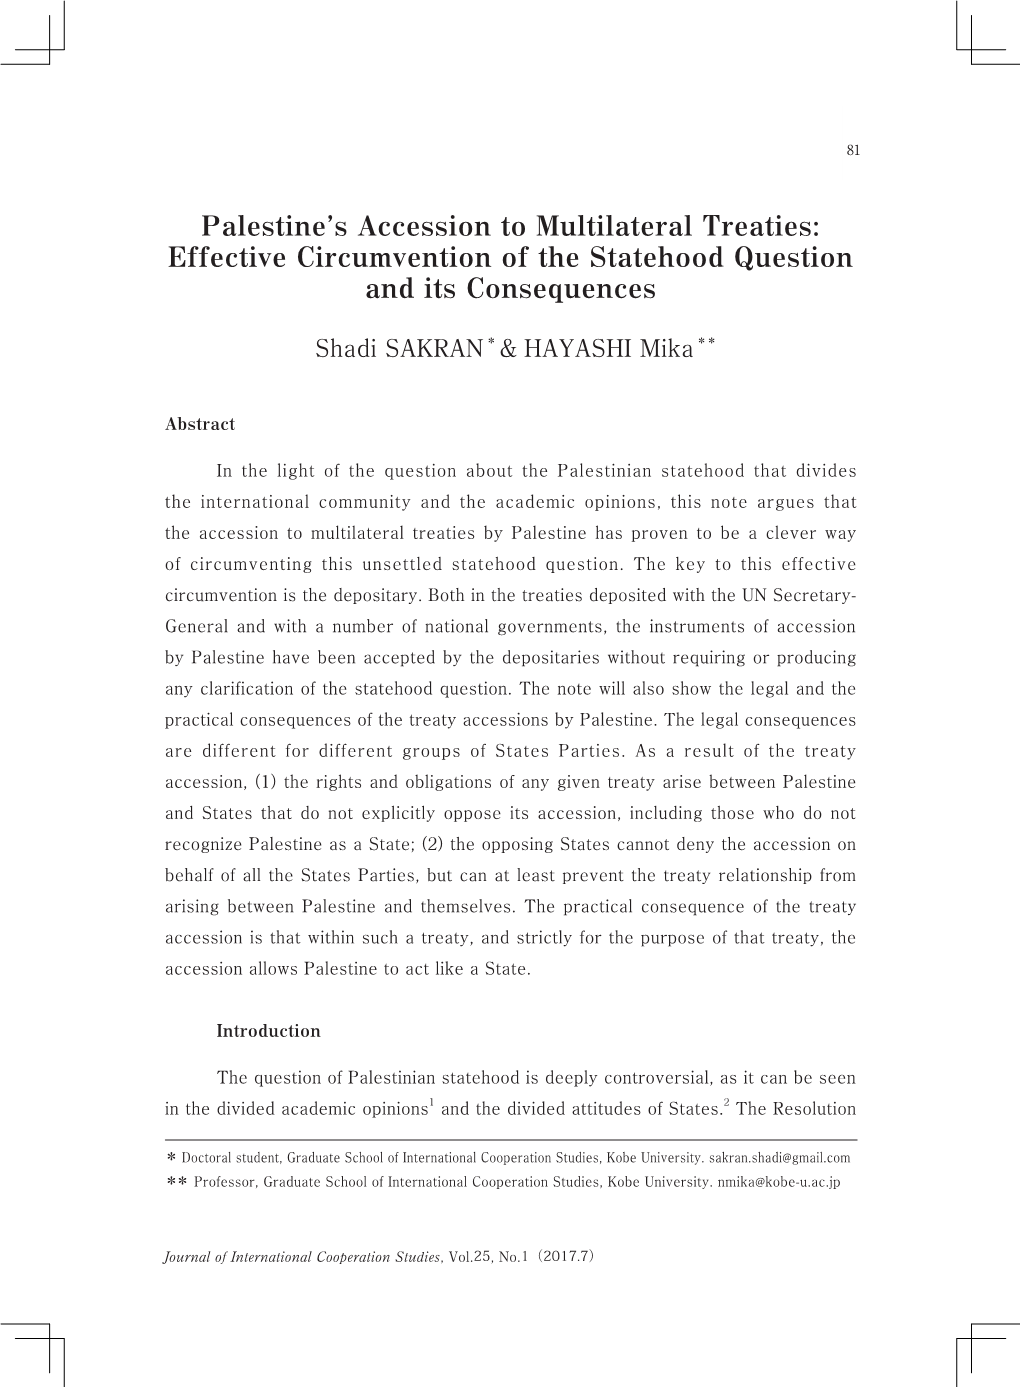 Palestine's Accession to Multilateral Treaties: Effective Circumvention Of